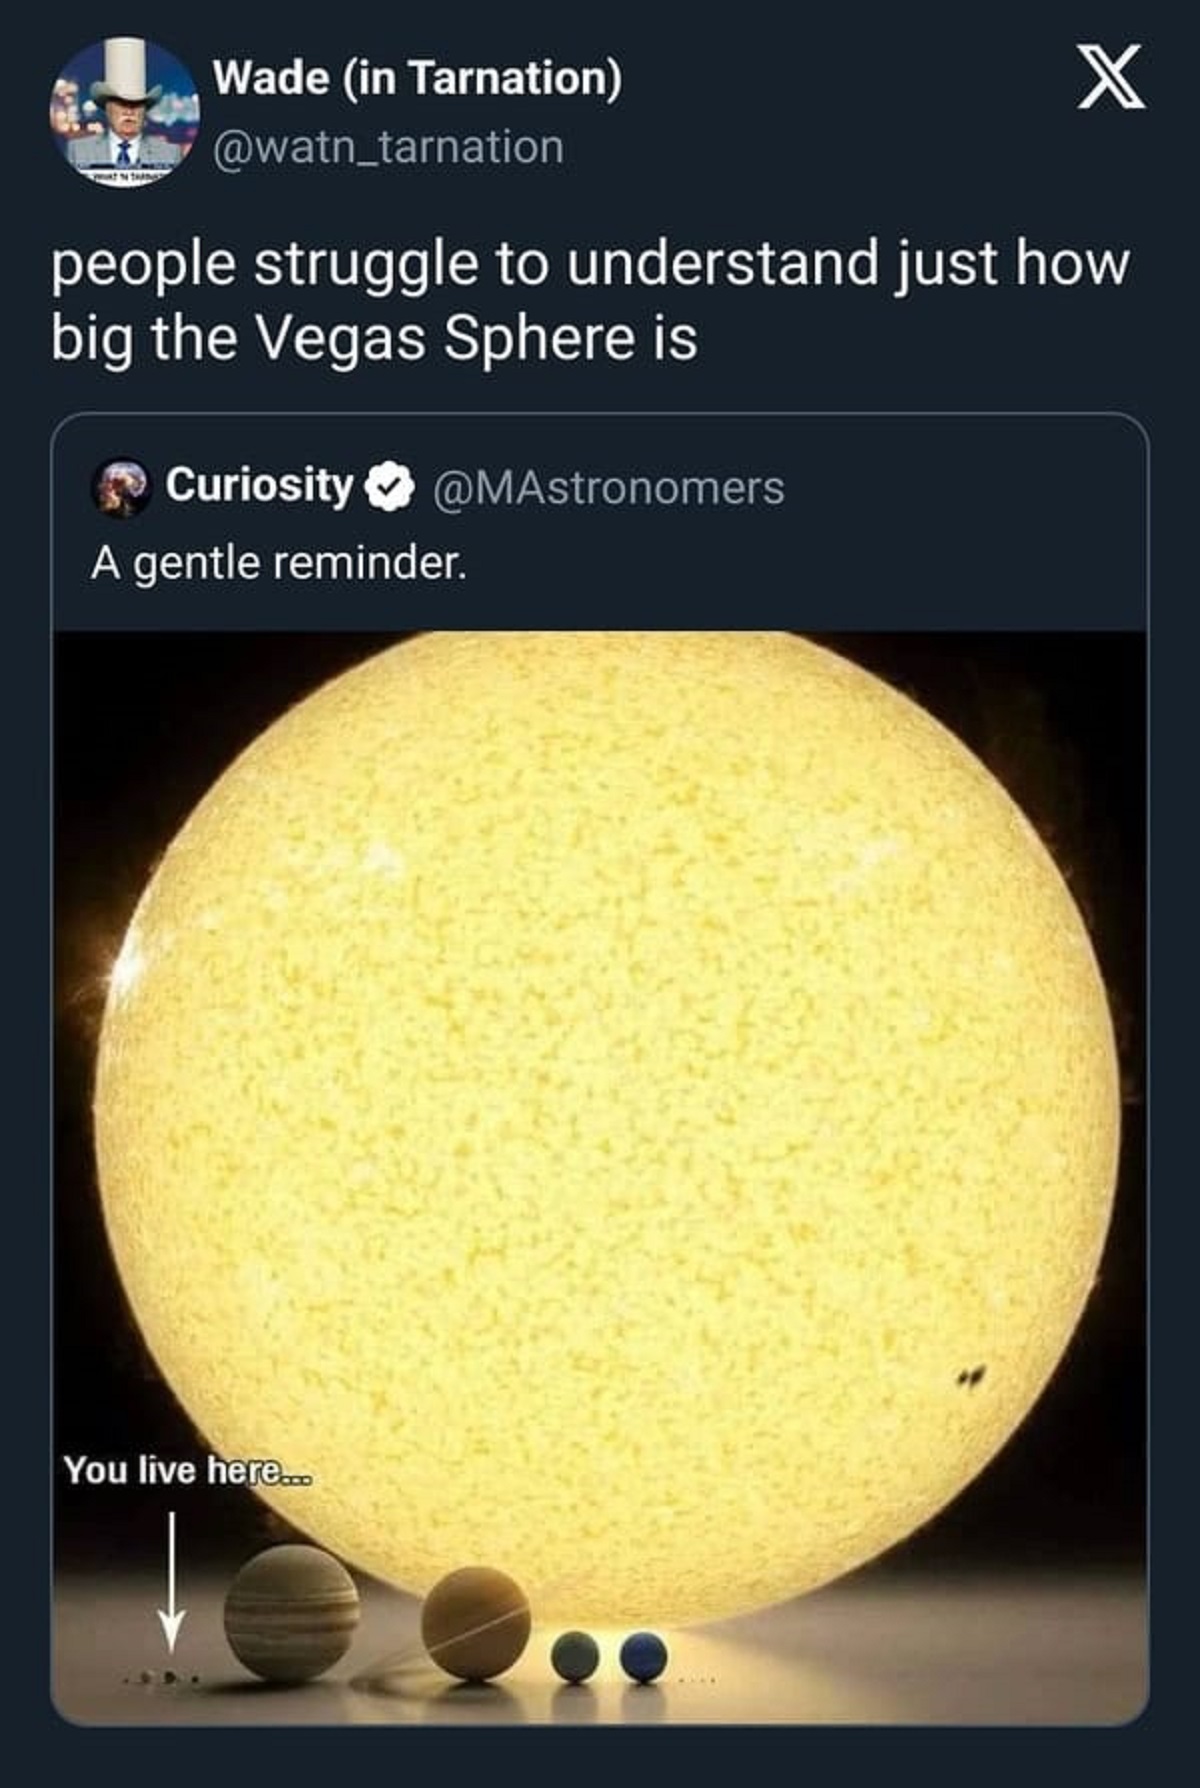 screenshot - Wade in Tarnation X people struggle to understand just how big the Vegas Sphere is Curiosity A gentle reminder. You live here...